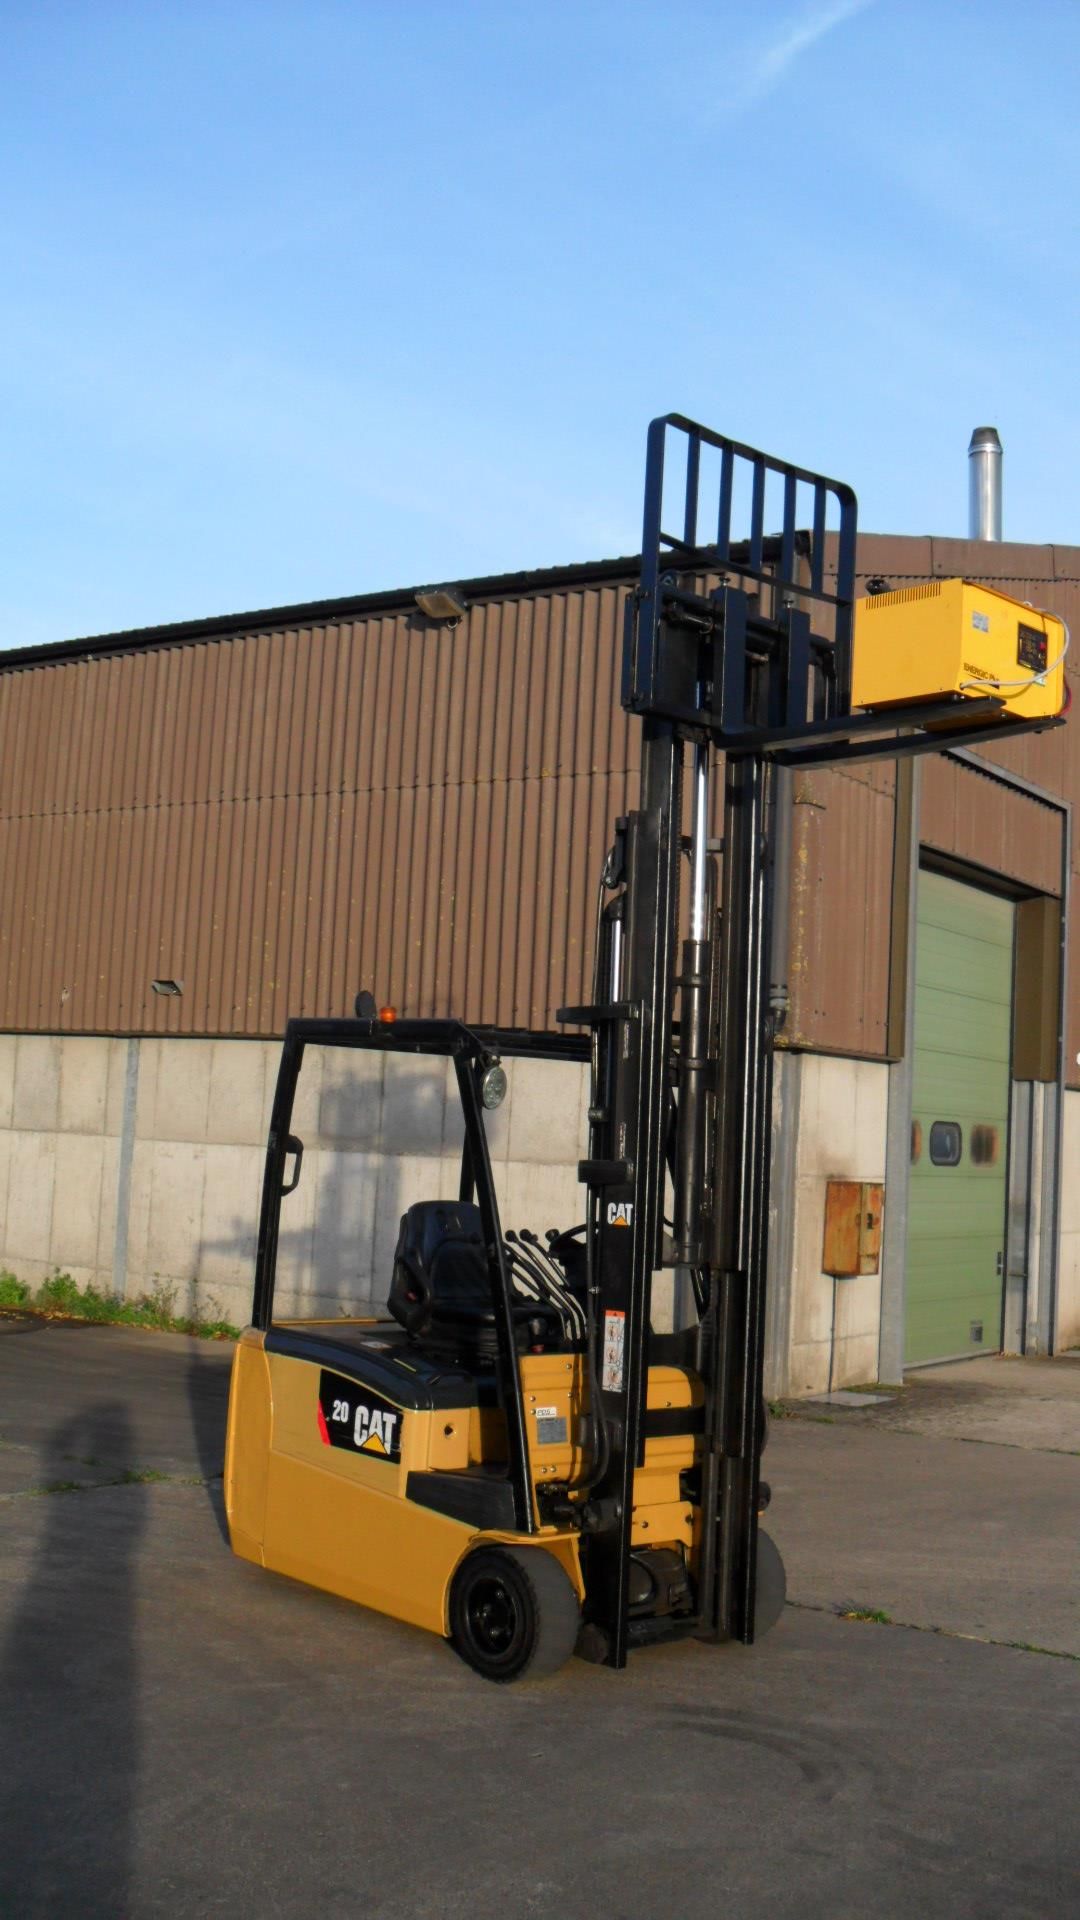 Cat EP20 PNT electric Forklift, 2015, serial no ETB24 00631, 4,219 hours, very good condition,